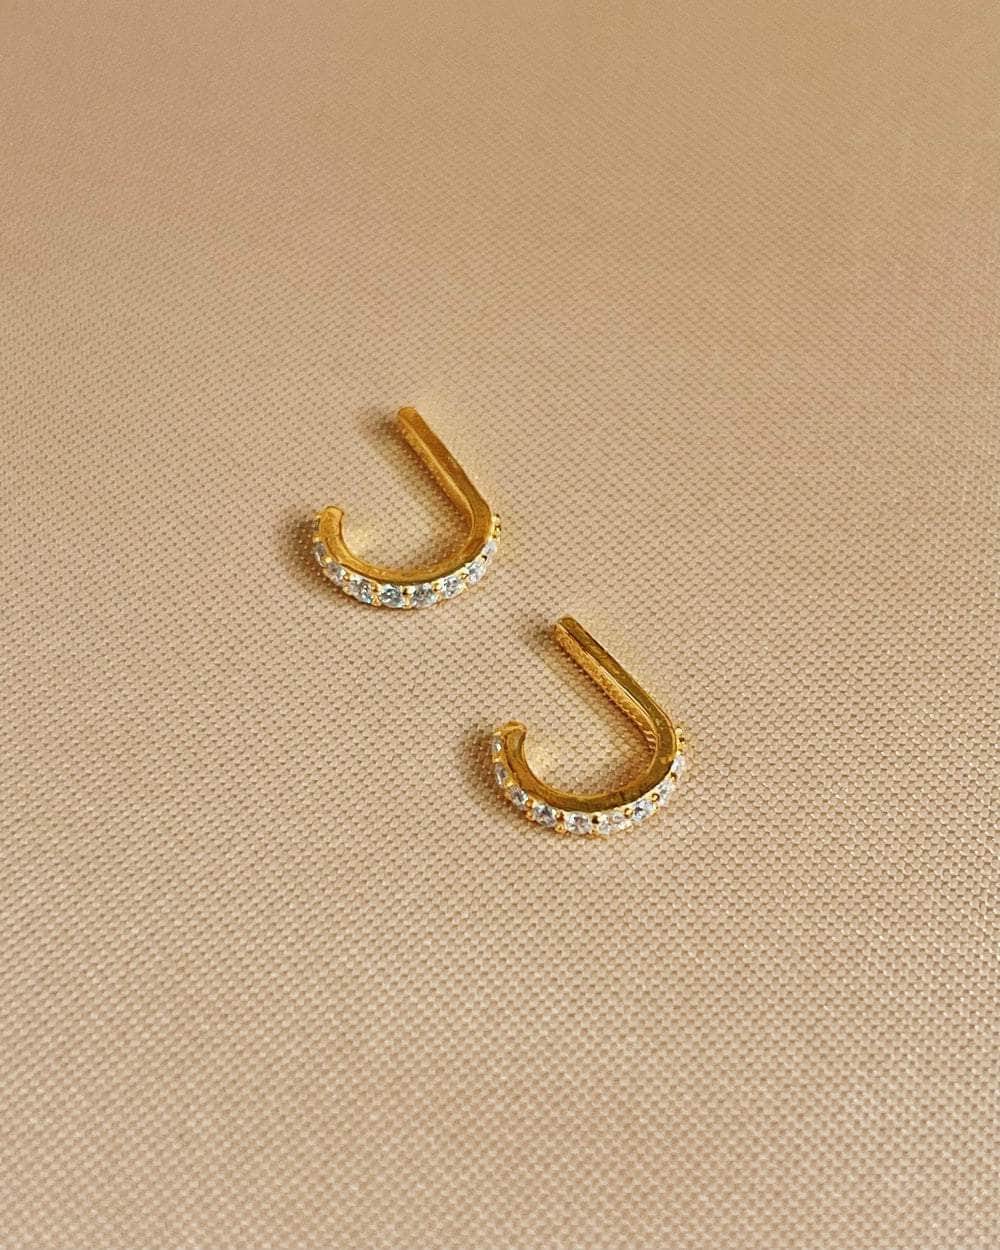 So Dainty Co. Ear Cuffs Ryleigh Gold Cuffs Gold Plated 925 Sterling Silver Jewelry